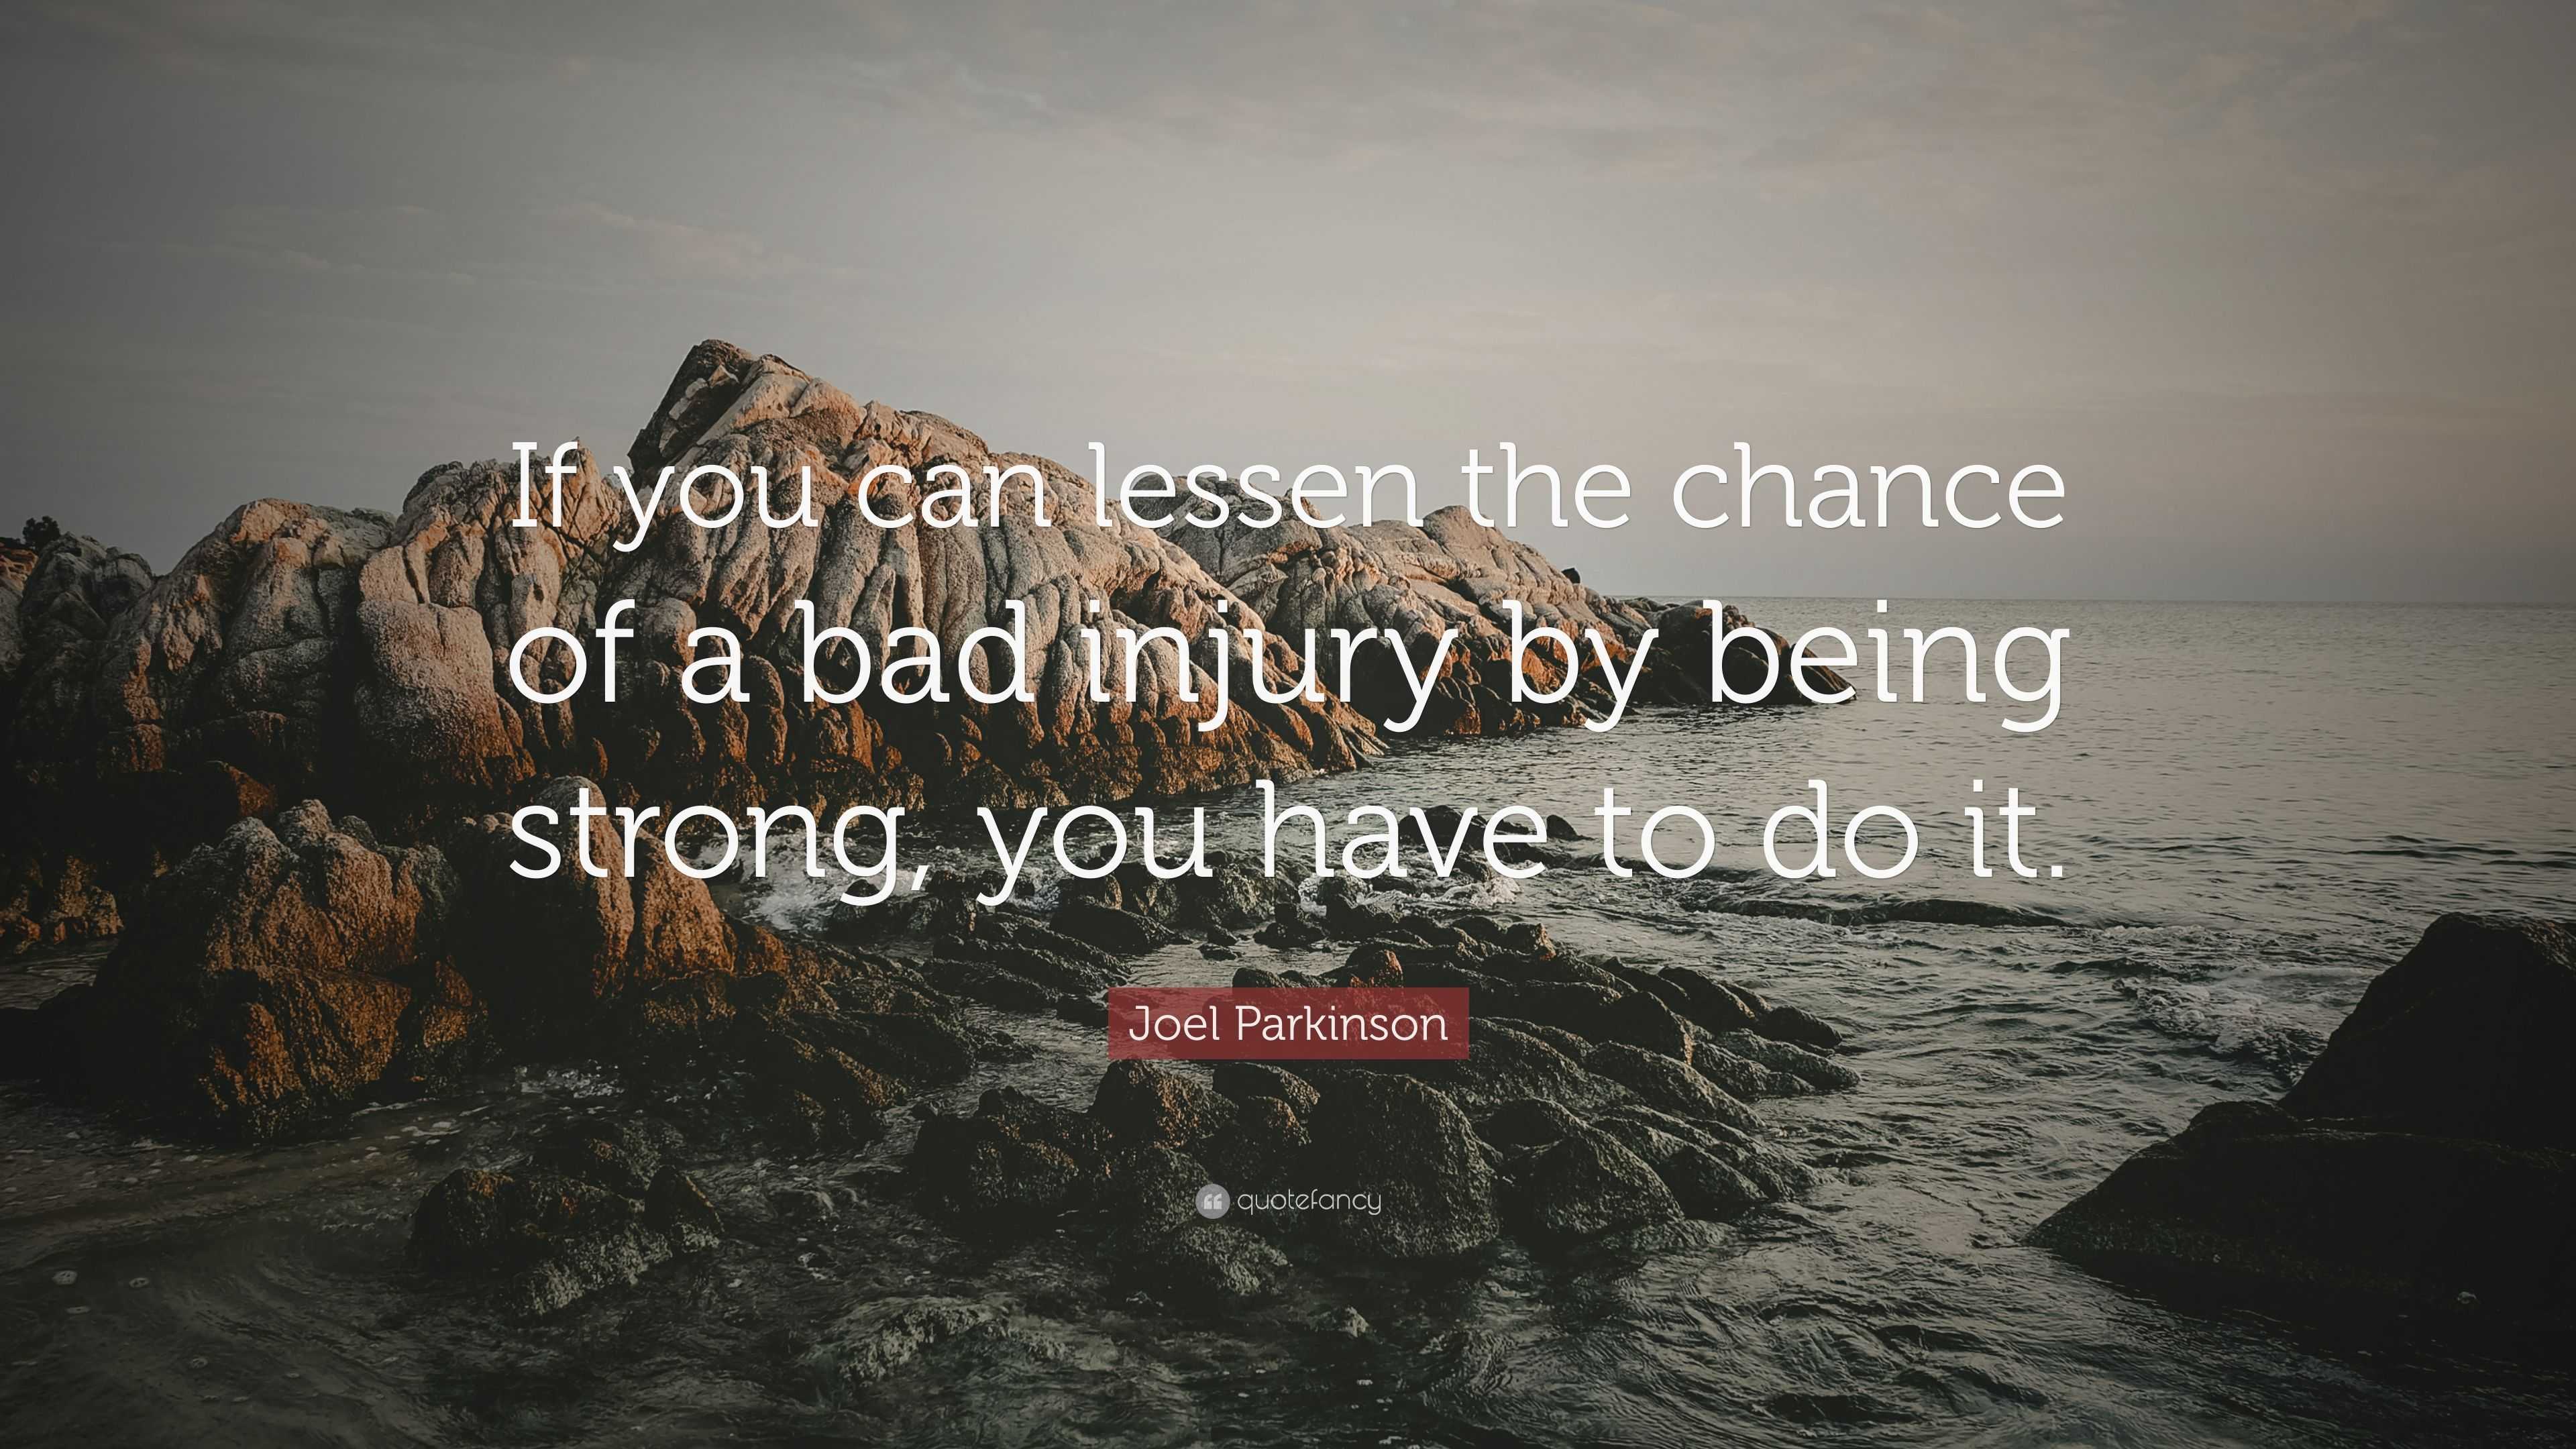 Joel Parkinson Quote: “If you can lessen the chance of a bad injury by